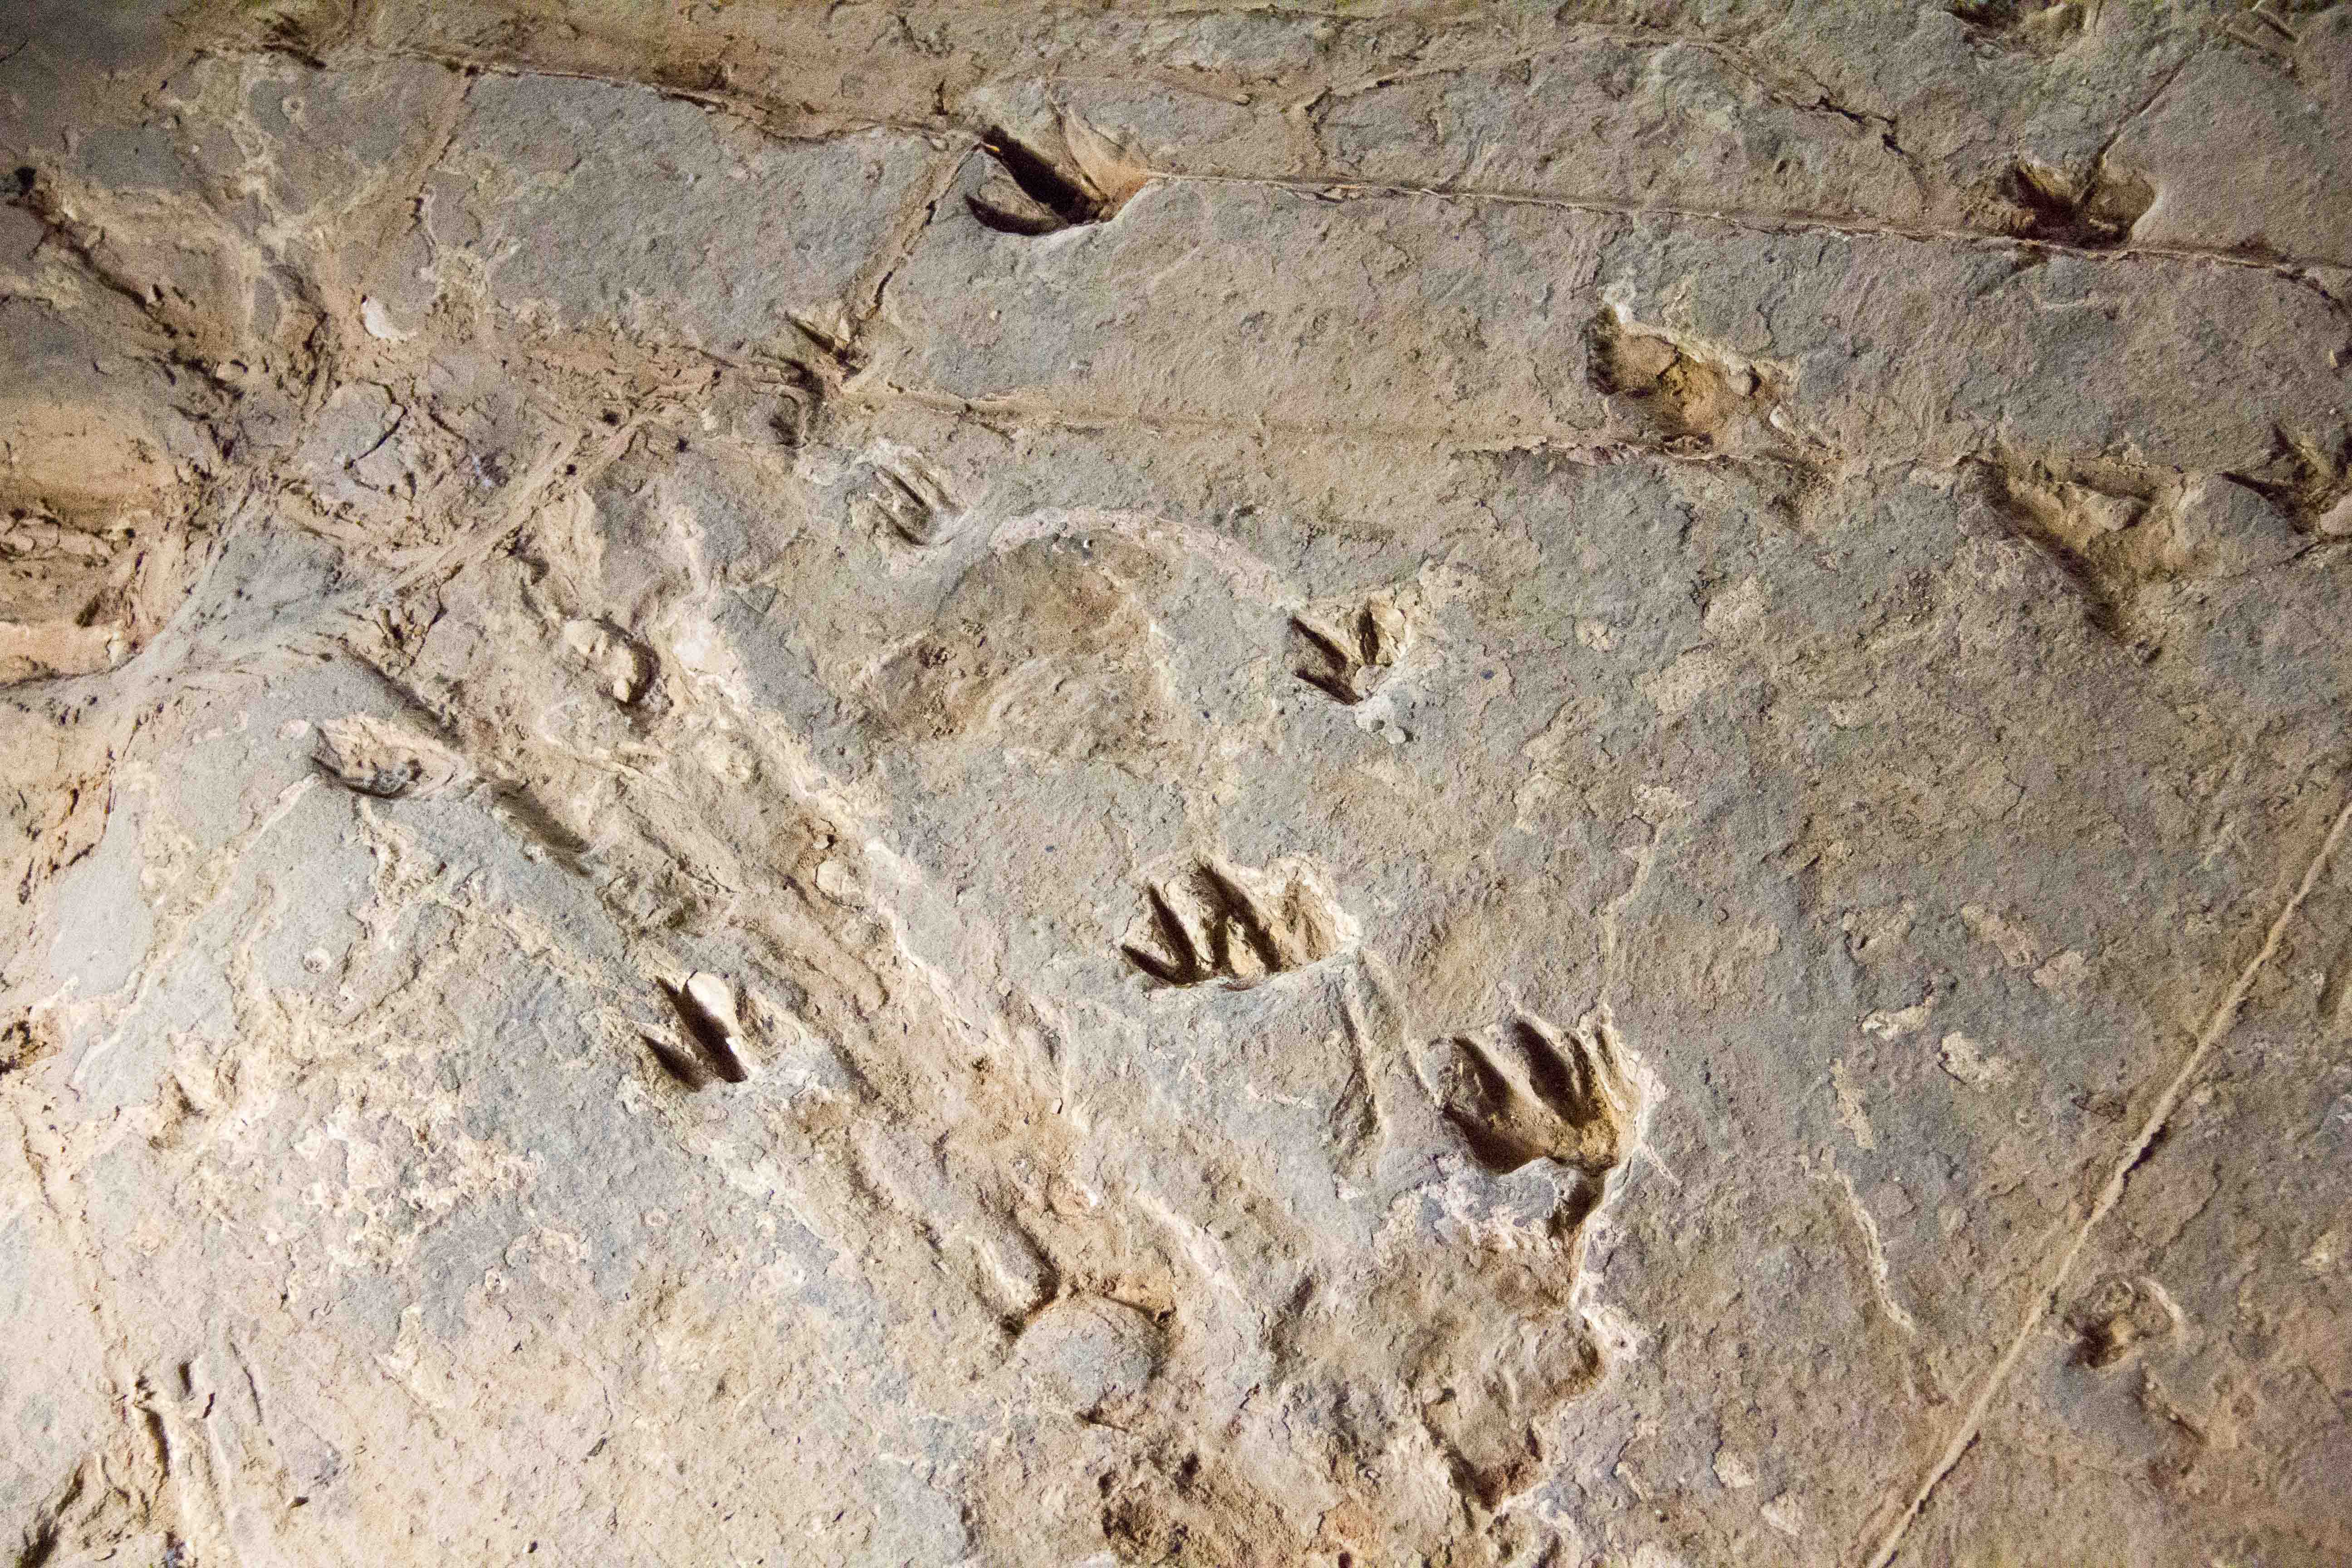 Footprints of the small chicken-sized theropod footprints, and the small emu-sized ornithopods, tracking quickly to the north-east, away from the camera.